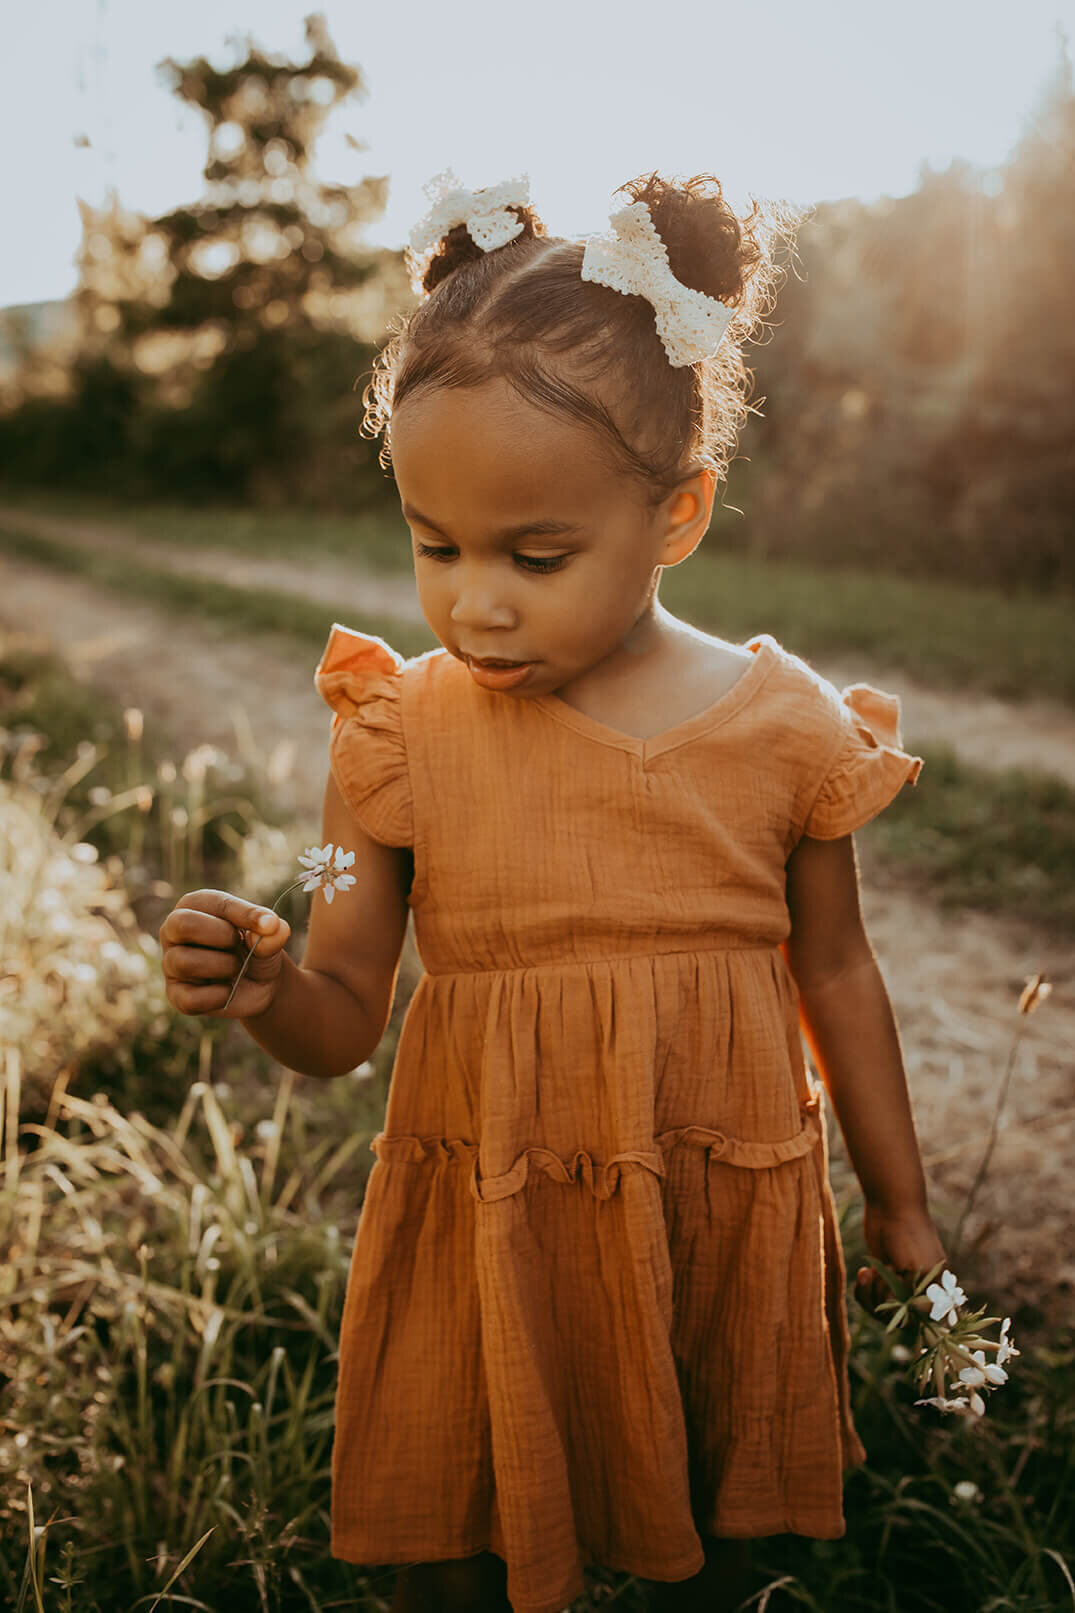 a three year old girl picks a wild flower in a field at sunset